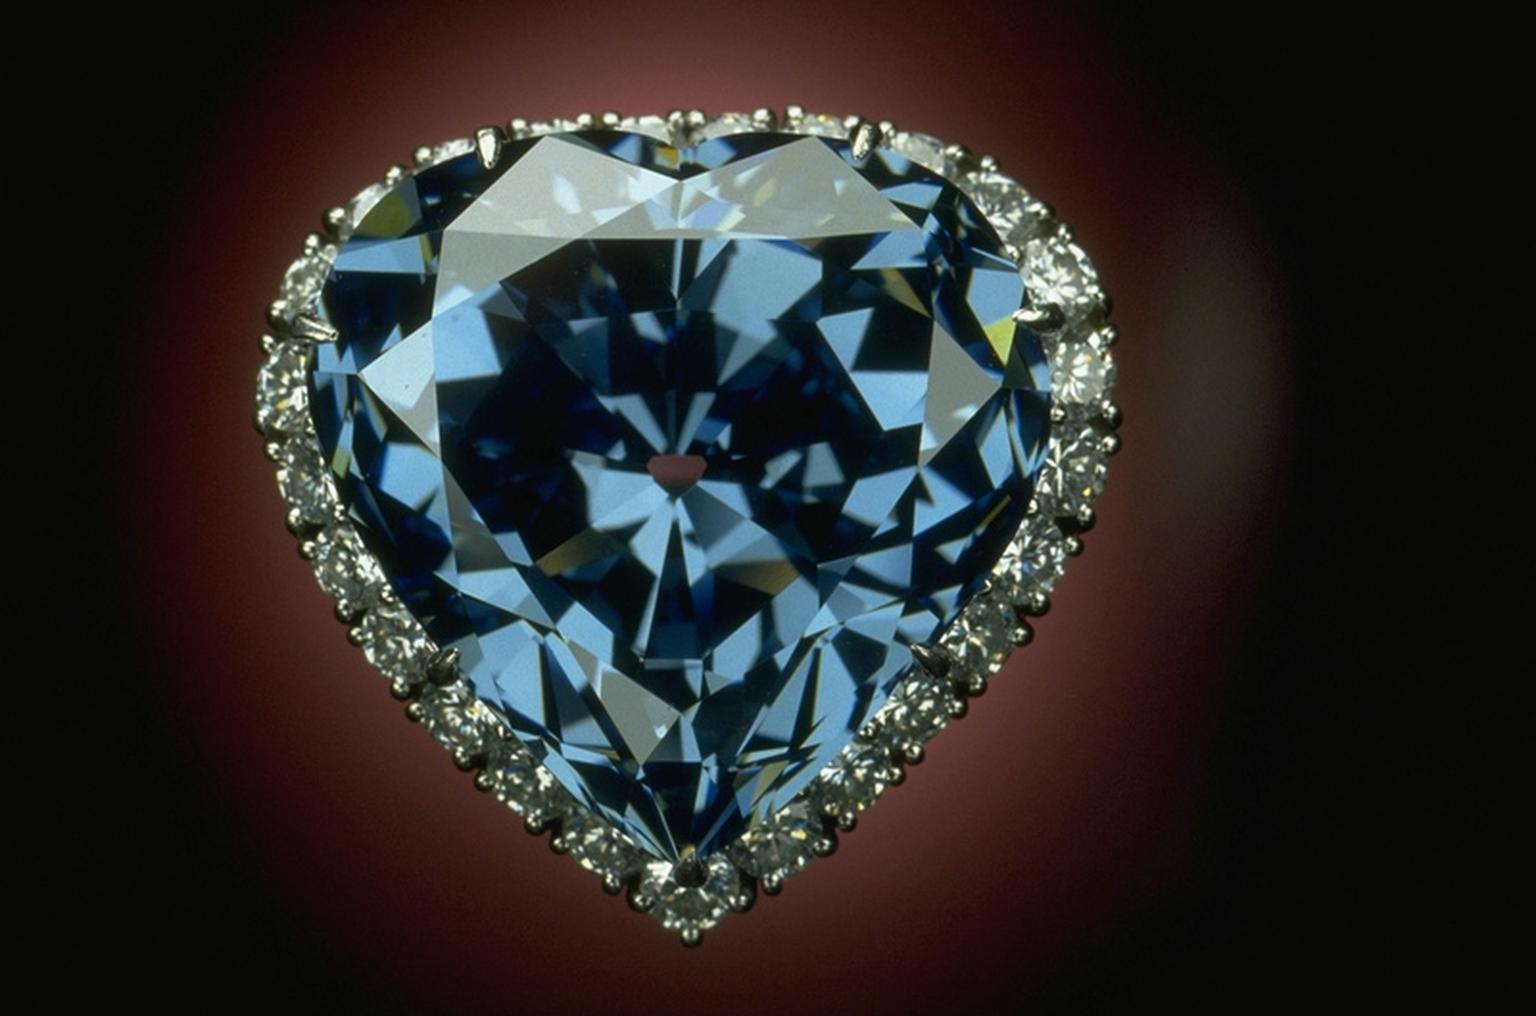 The 30.62ct Blue Heart diamond, part of the Smithsonian National Gem collection, was originally faceted by French jeweller Atanik Eknayan in 1909-1910, and then set in its current platinum ring setting by Harry Winston in 1959. Photo credit: Chip Clark.